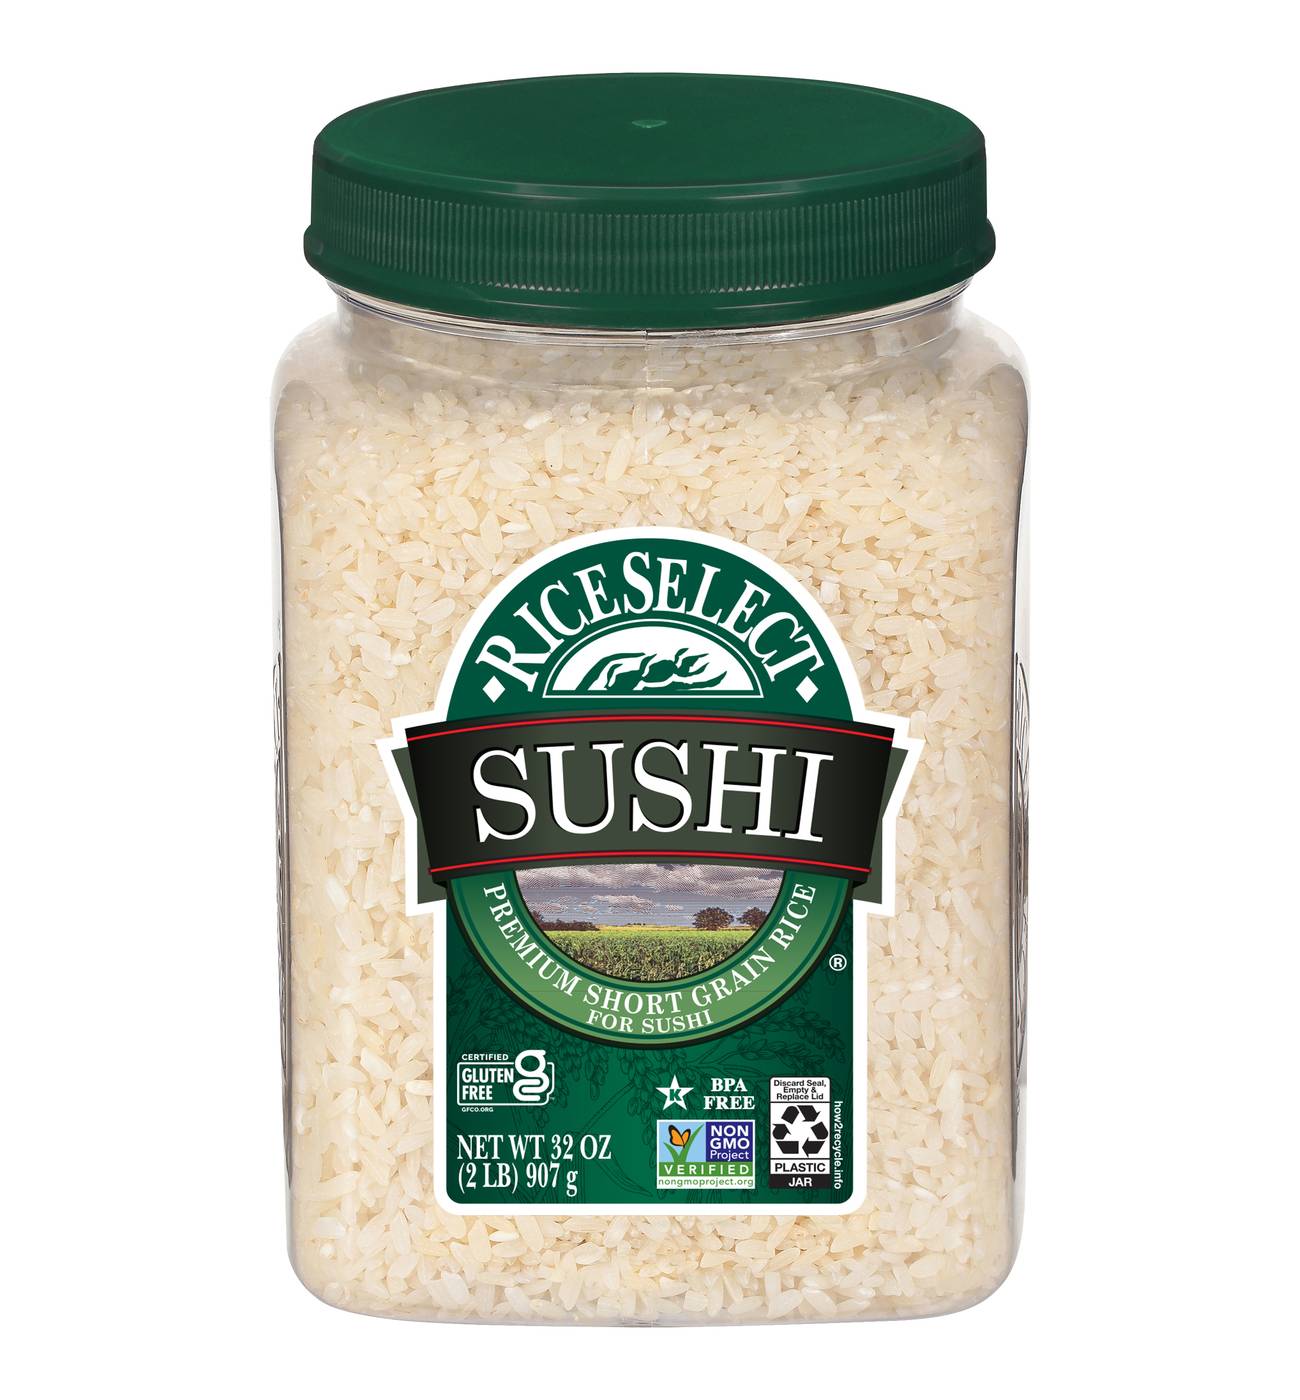 RiceSelect Sushi Rice; image 1 of 5